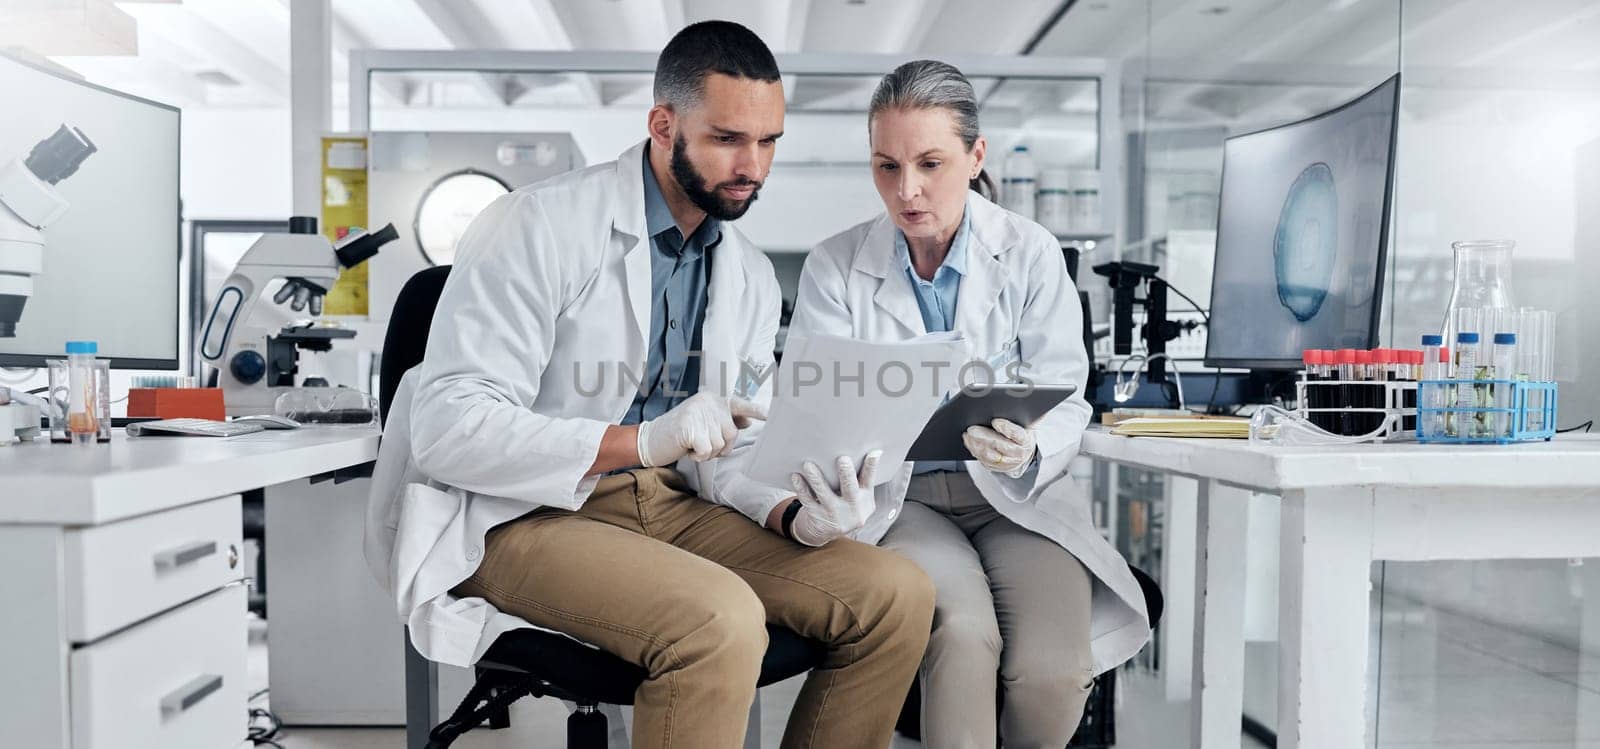 Scientist partnership document for medical research laboratory discussion in healthcare science future innovation report. Man and woman doctor teamwork talk on exam or test analysis biology paperwork.